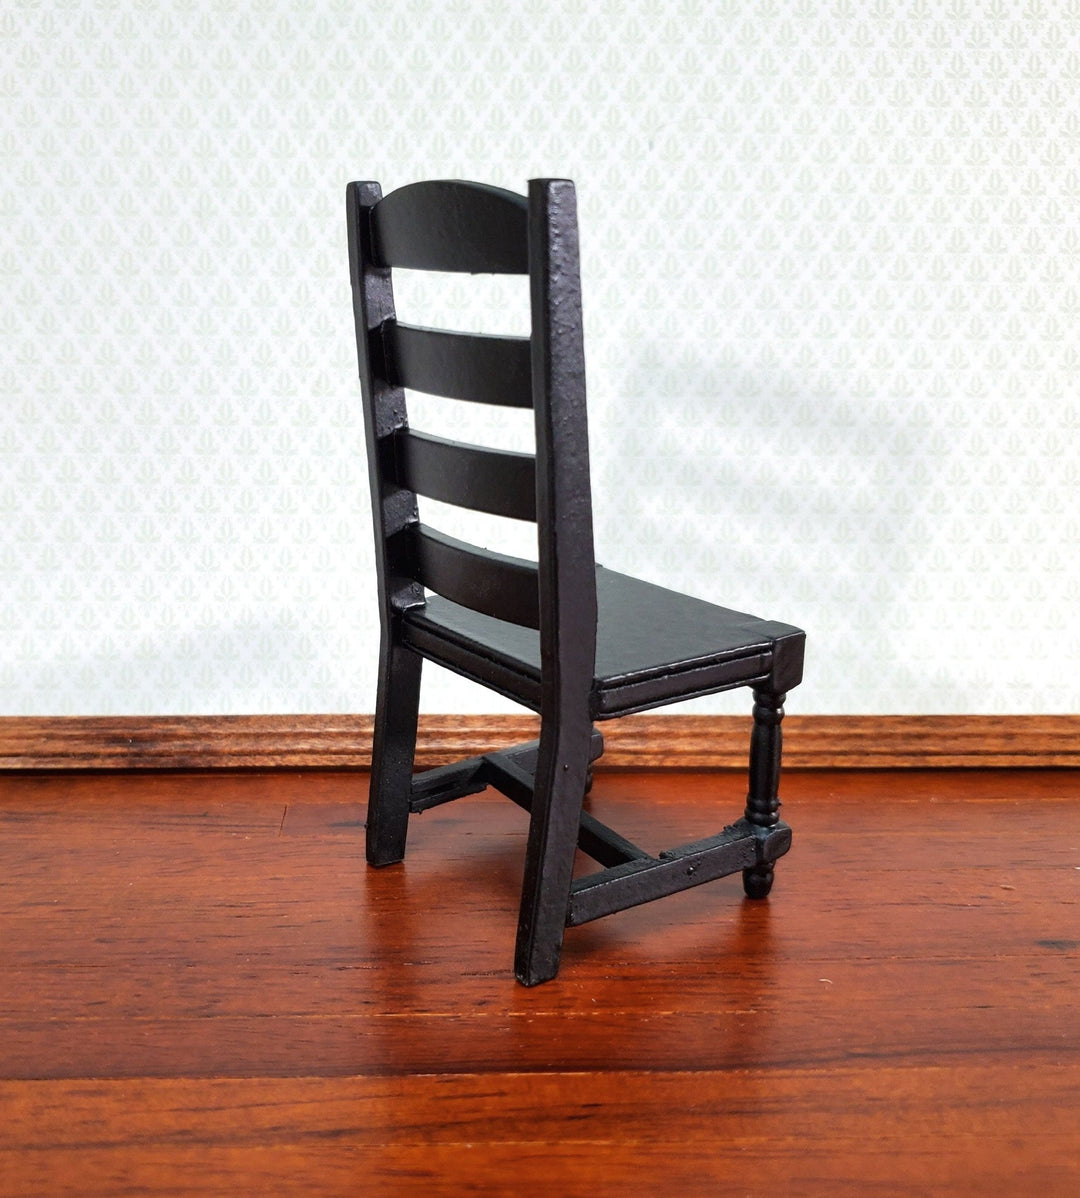 Dollhouse Chair Ladderback for Kitchen or Dining Room Black 1:12 Scale Miniature Furniture - Miniature Crush